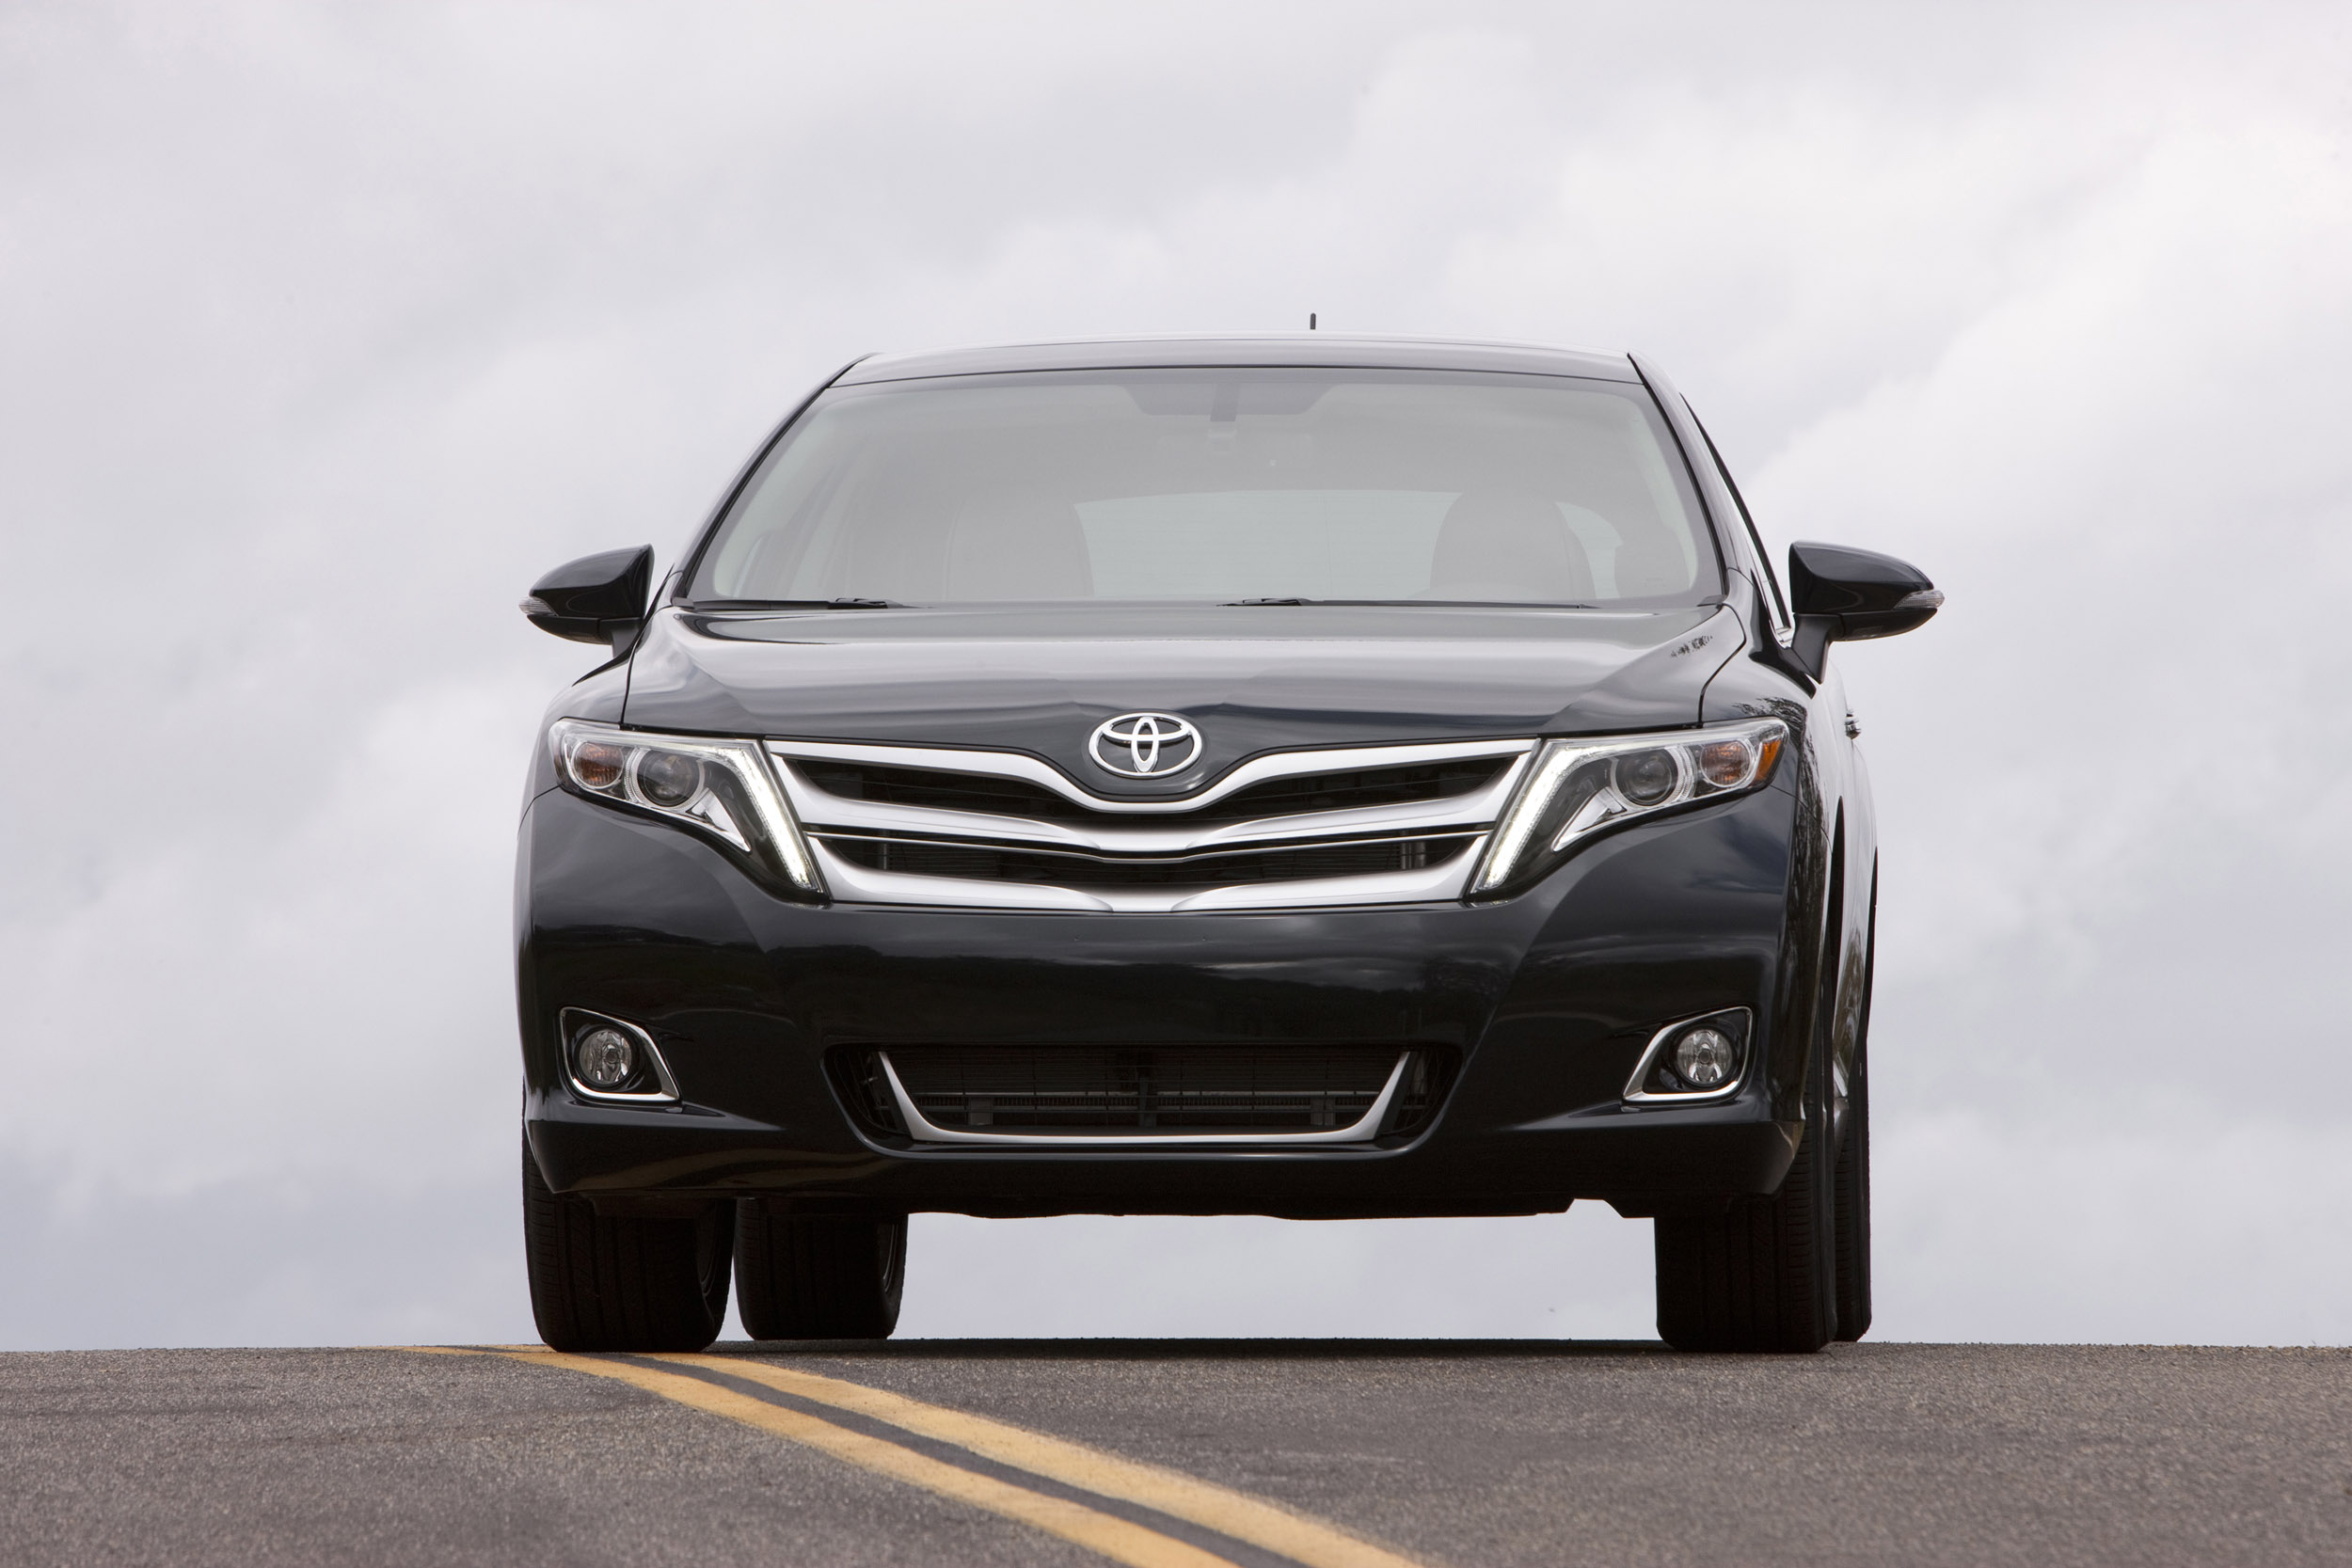 2016 Toyota Venza Limited V6 AWD Specs and features - MSN Autos